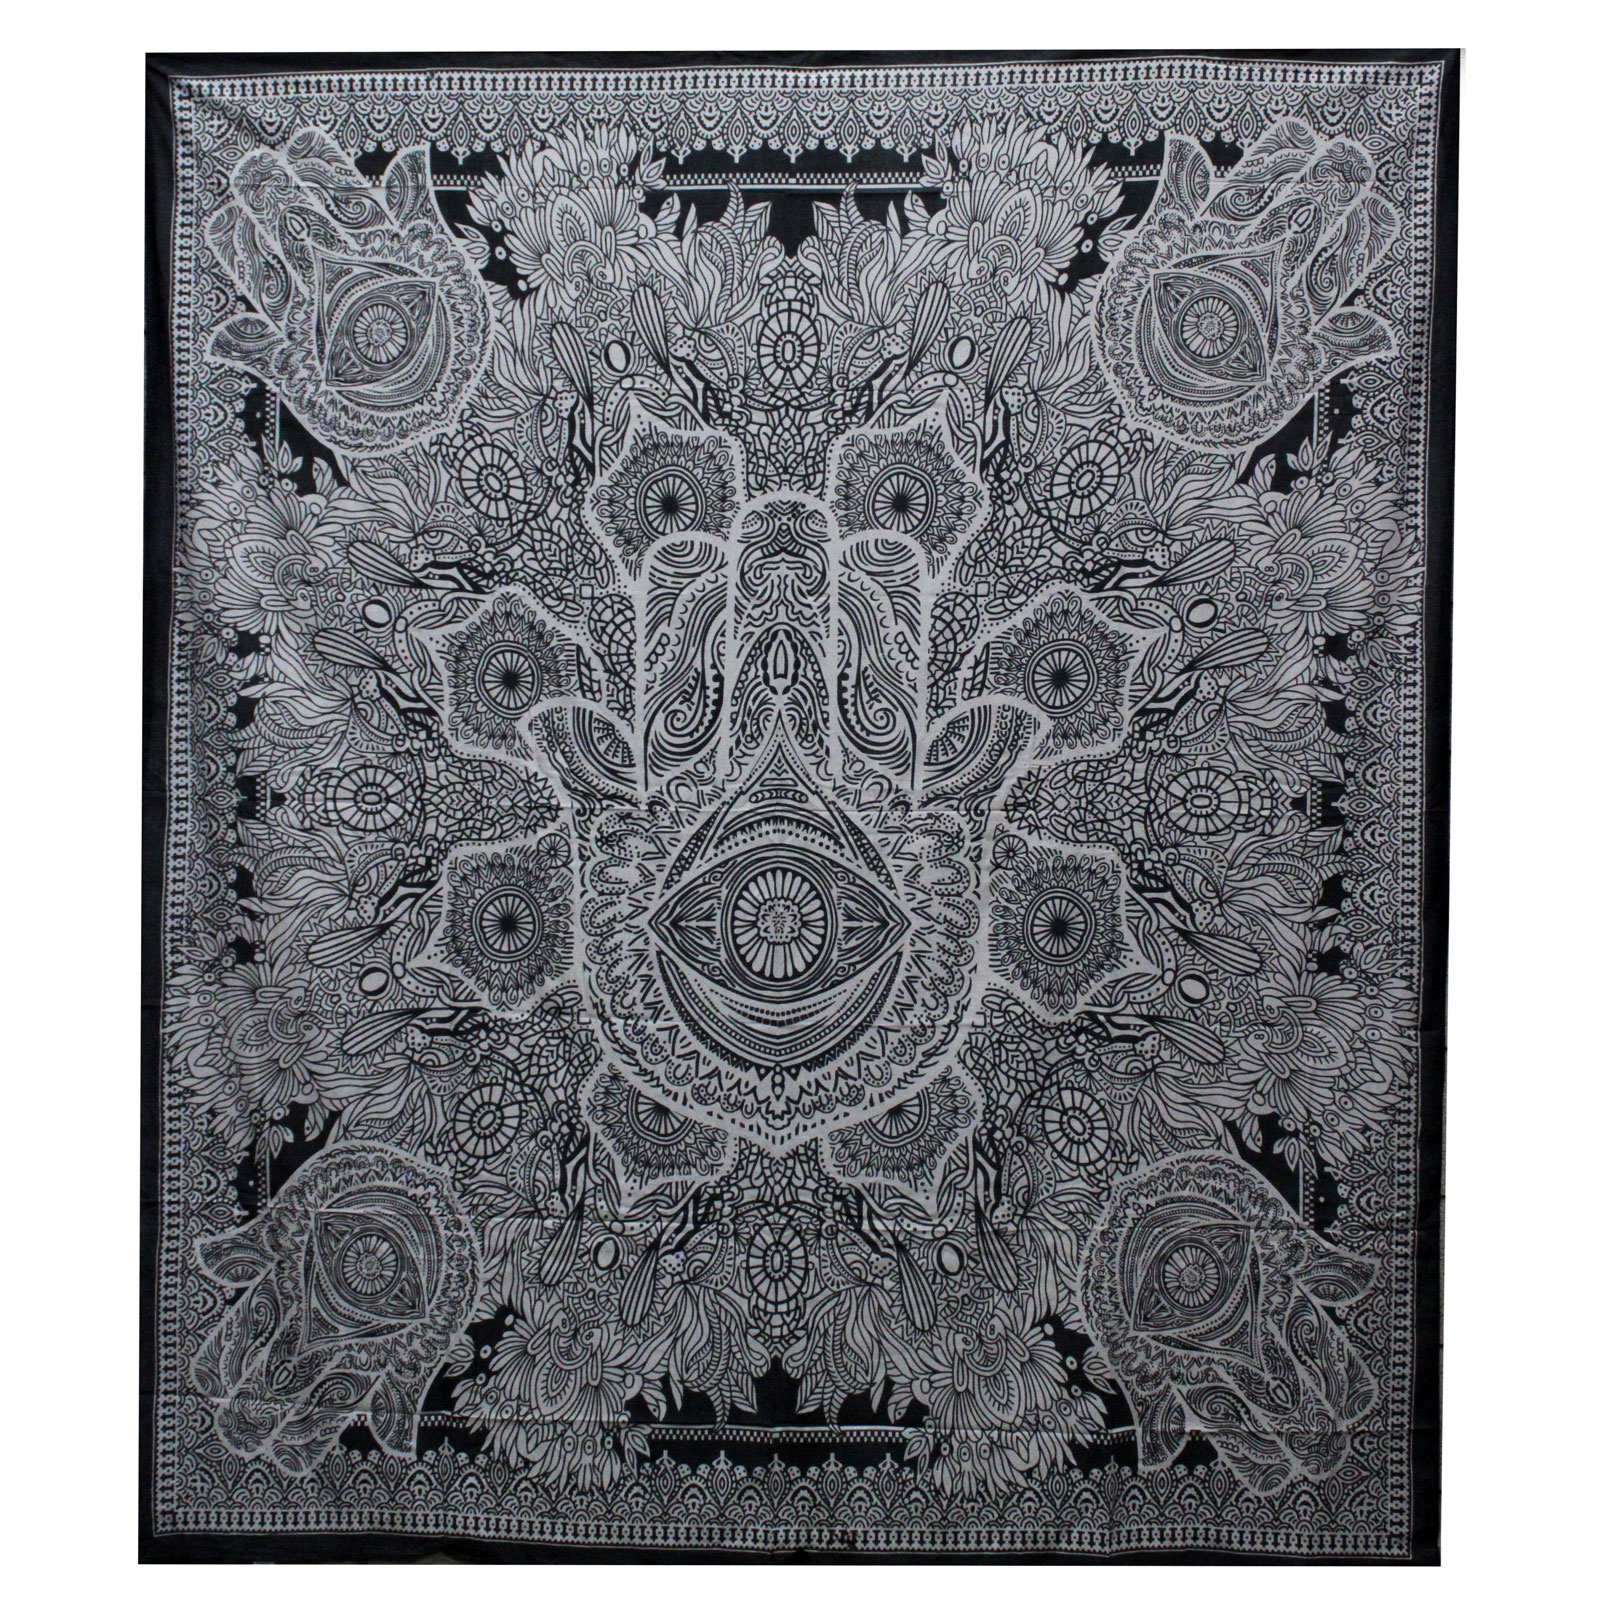 B&W Double Cotton Bedspread Wall Hanging - Hamsa - Click Image to Close